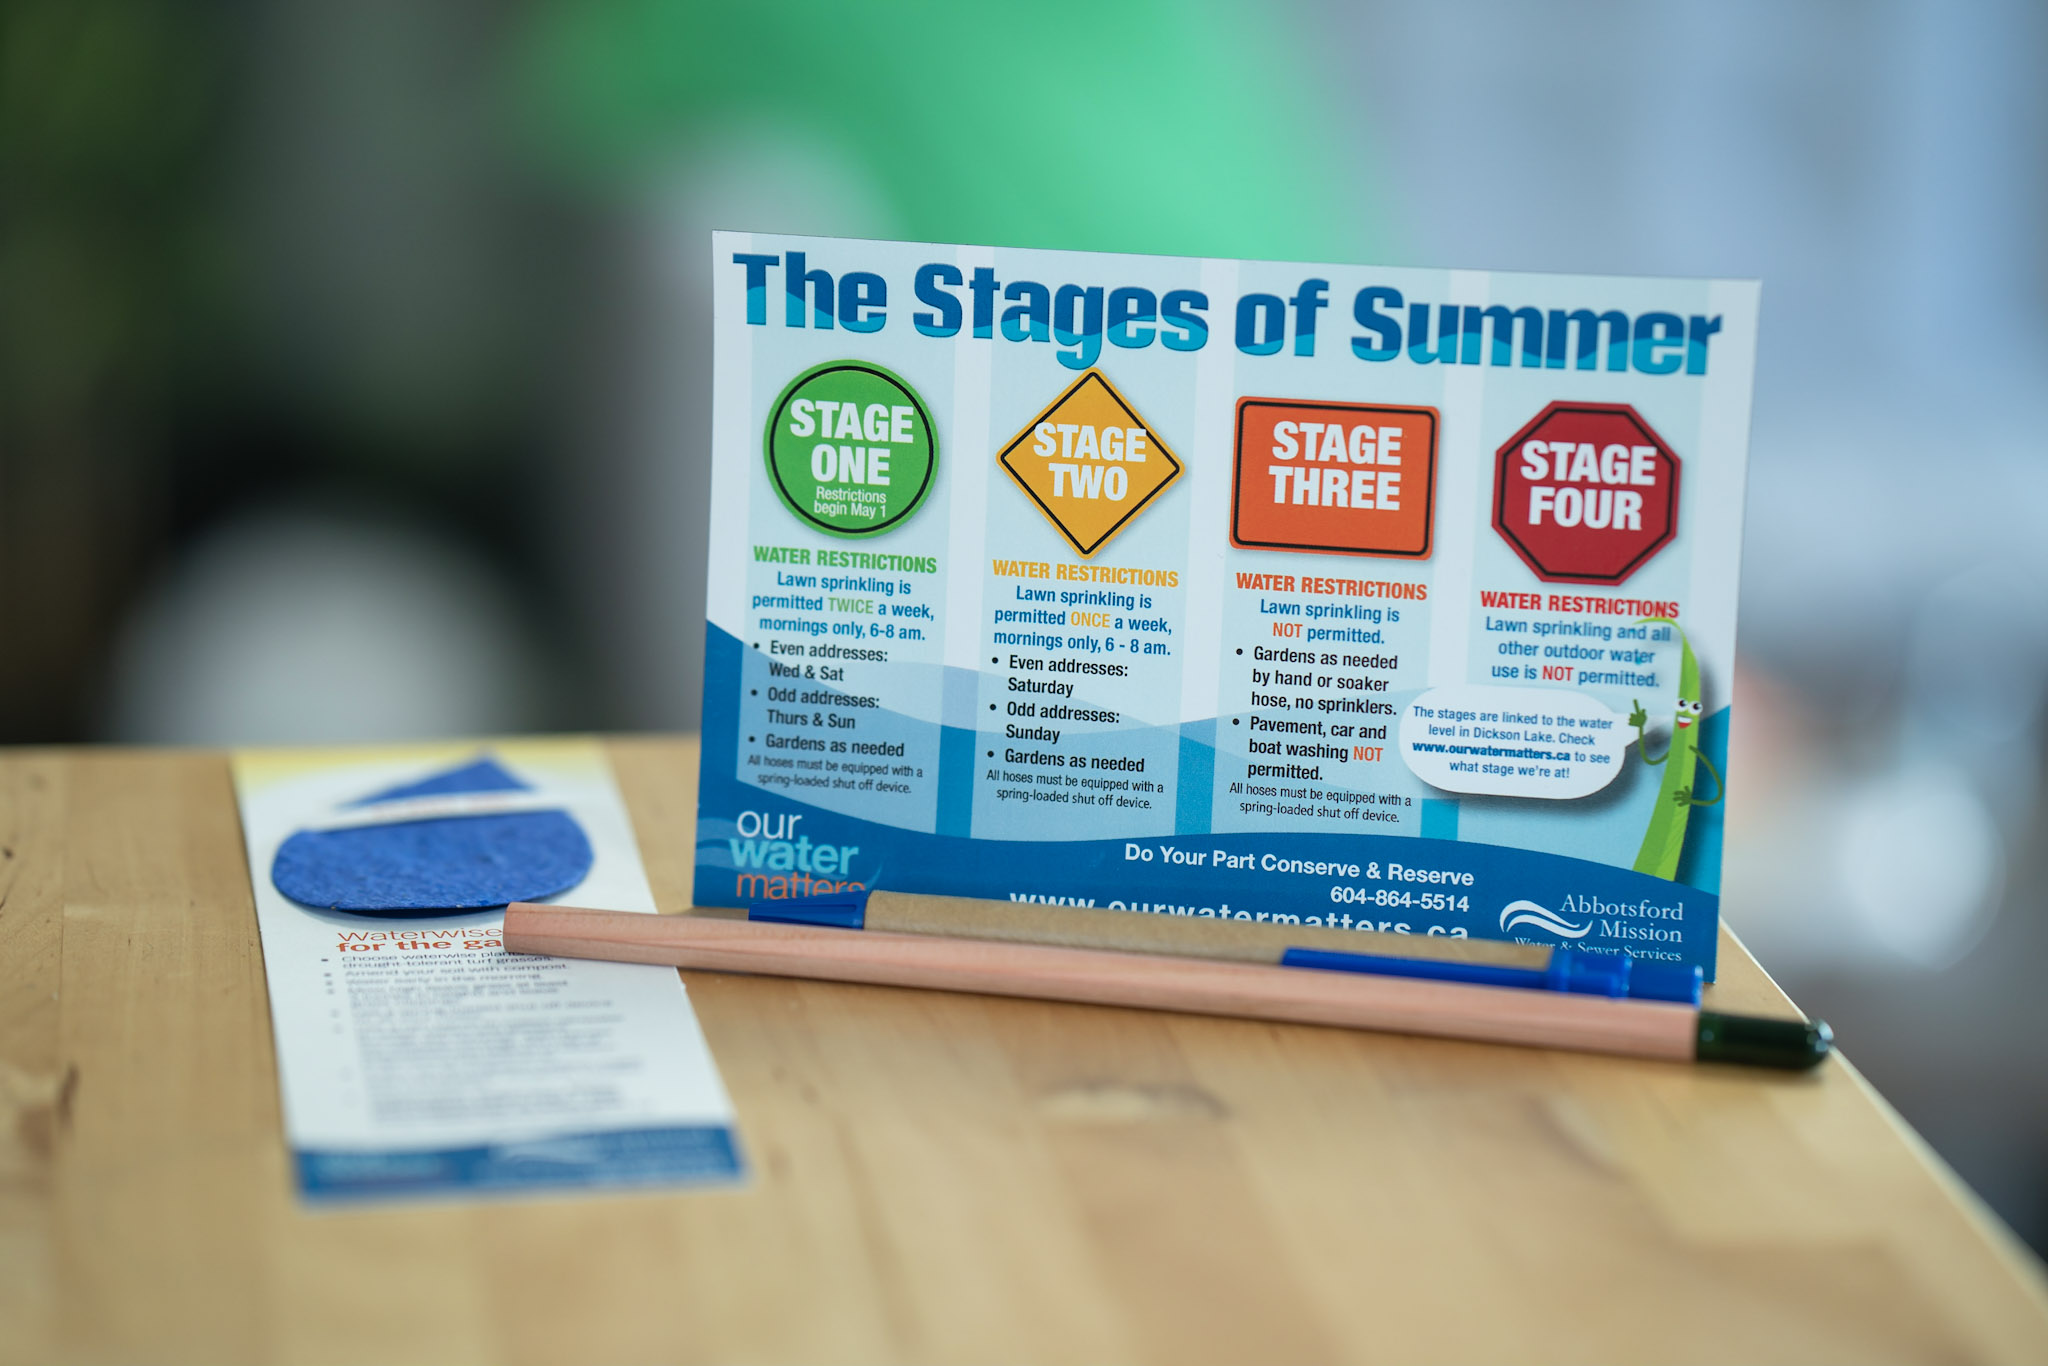 Image of a Post card with the stages of summer depicting stage one stage two stage three and stage 4 water restrictions for Abbotsford. Accompanied by a bookmark, pencil, and pen.